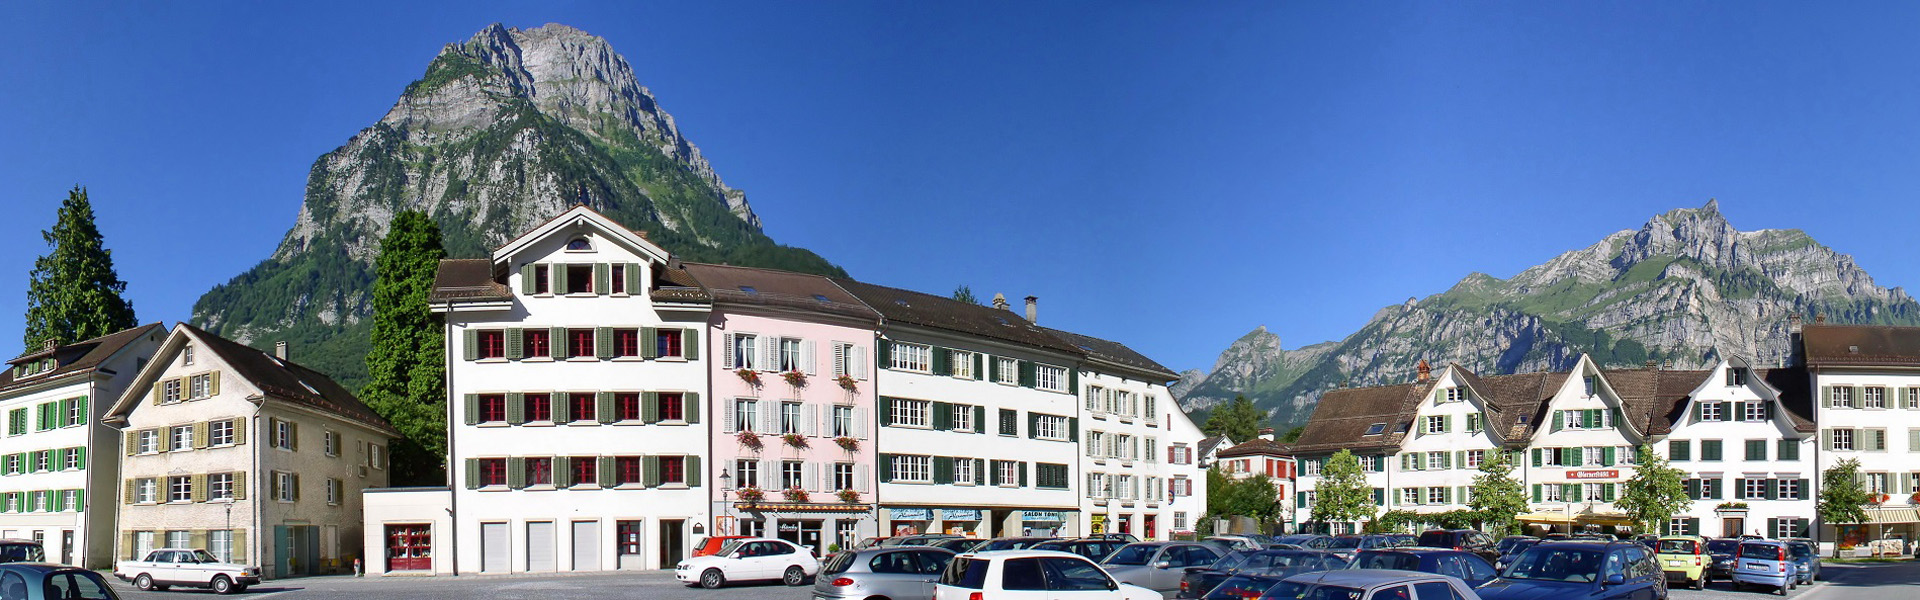 Glarus is the capital of the canton of Glarus in Switzerland, Gl